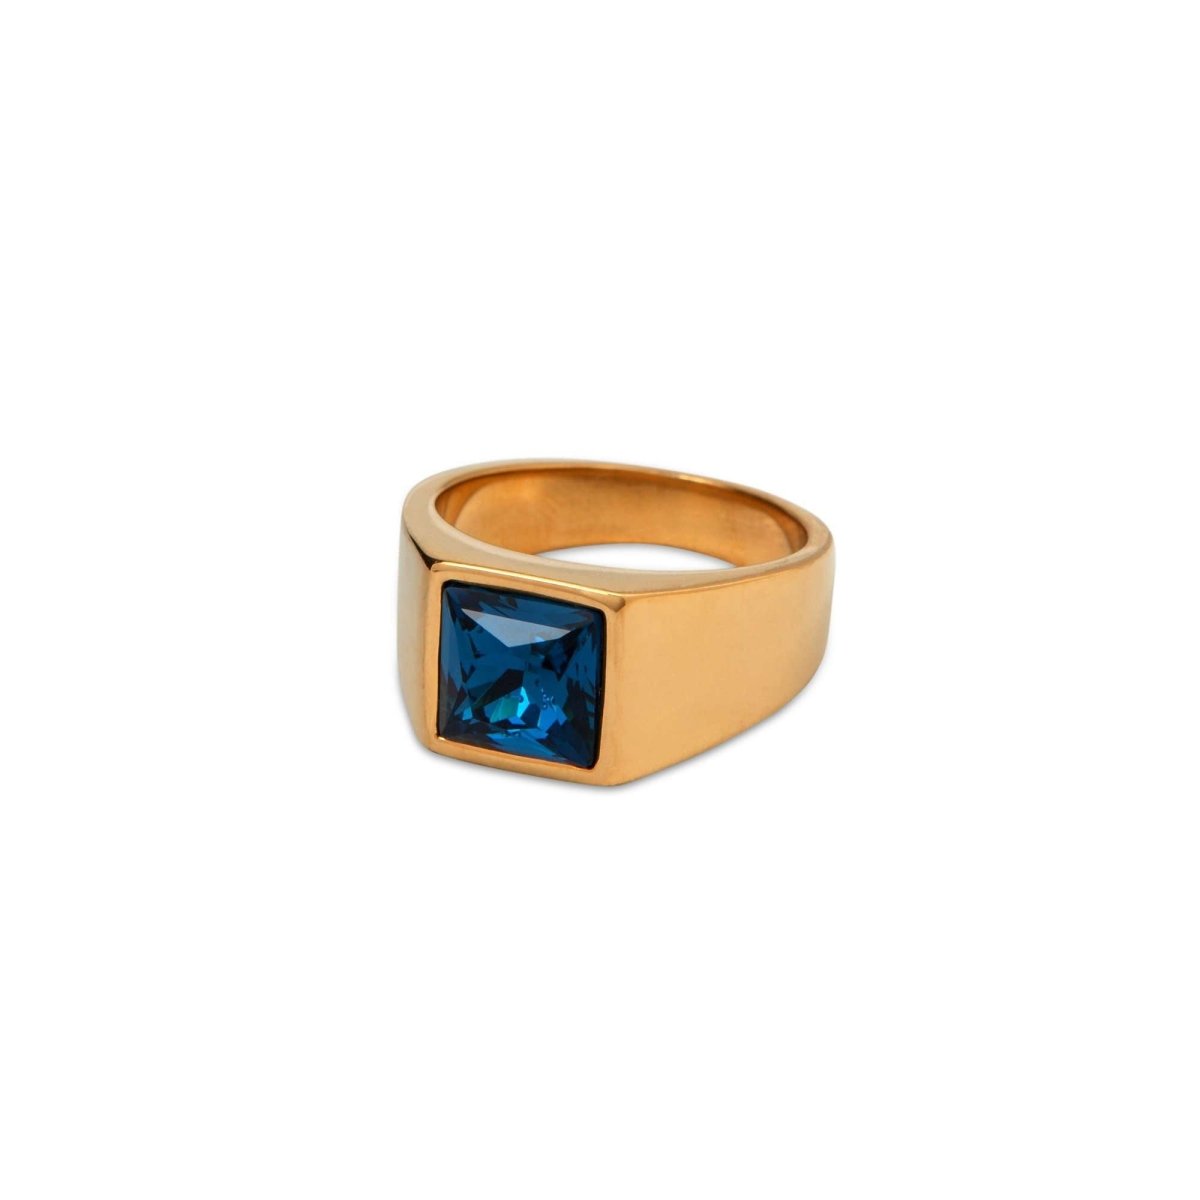 Embedded Crystal Gold Ring - MenSuits